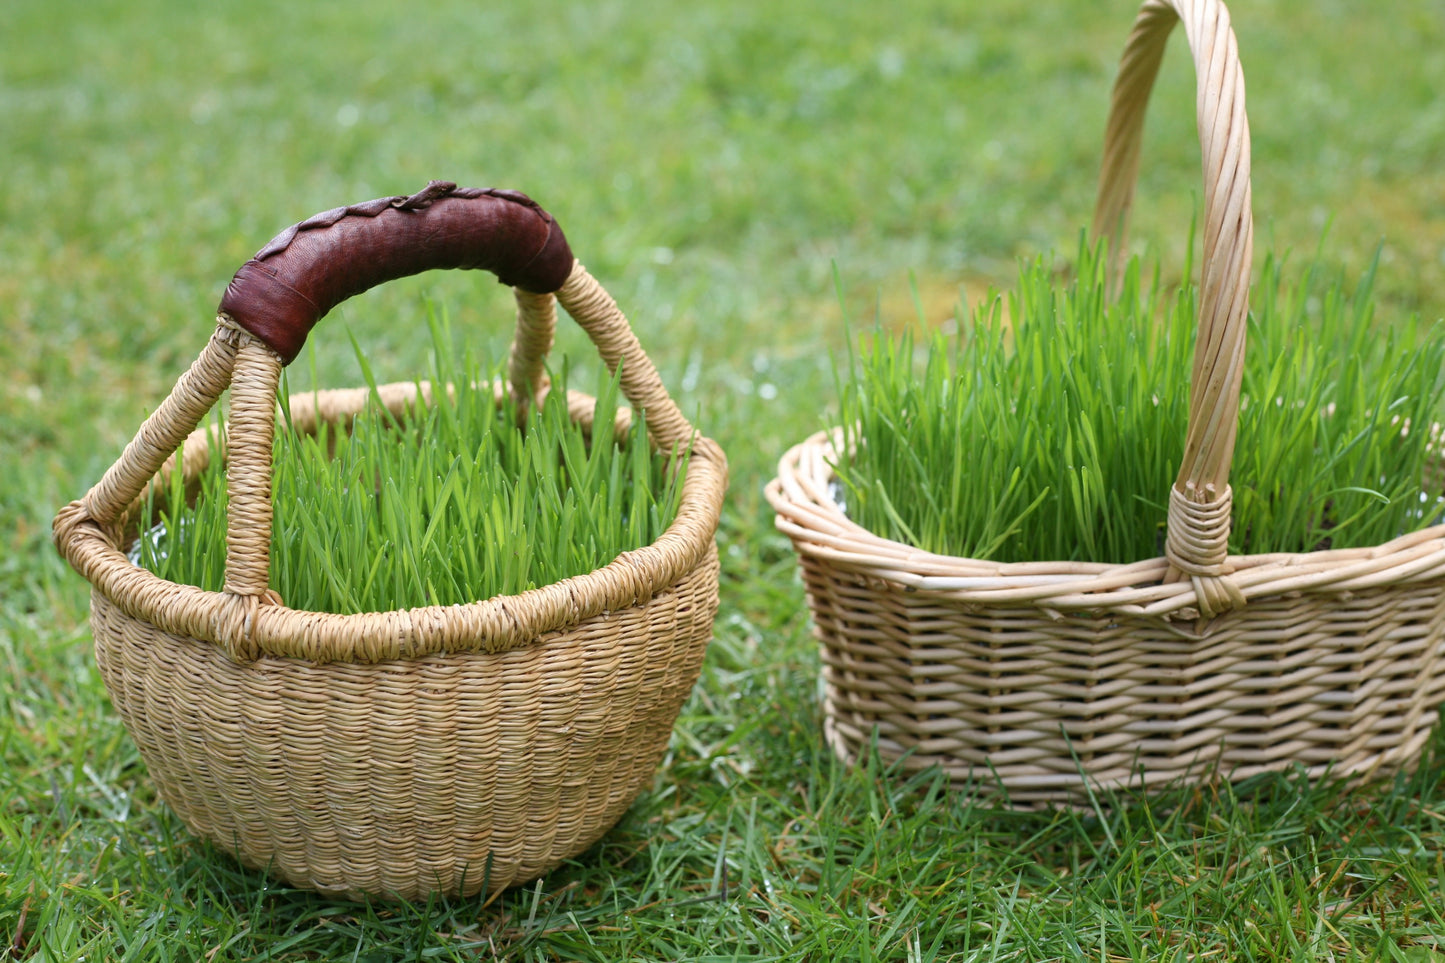 Grow Your Own Grass for Natural Easter Baskets! - Challenge & Fun, Inc.